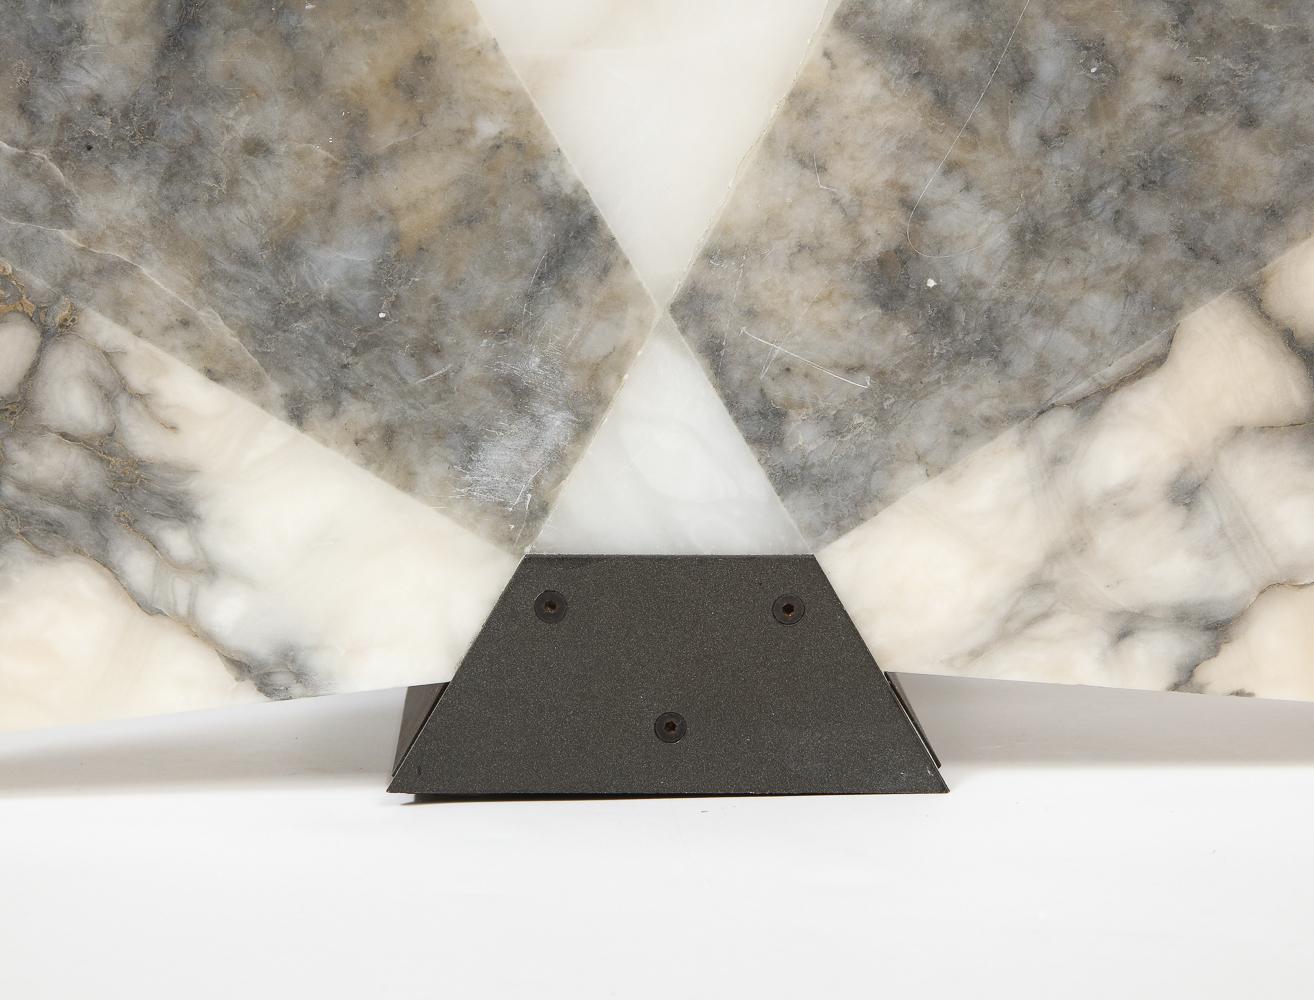 Marble, painted metal. Produced by Skipper Pollux. 3 different marble types fused together to form a semi-circular light diffuser.